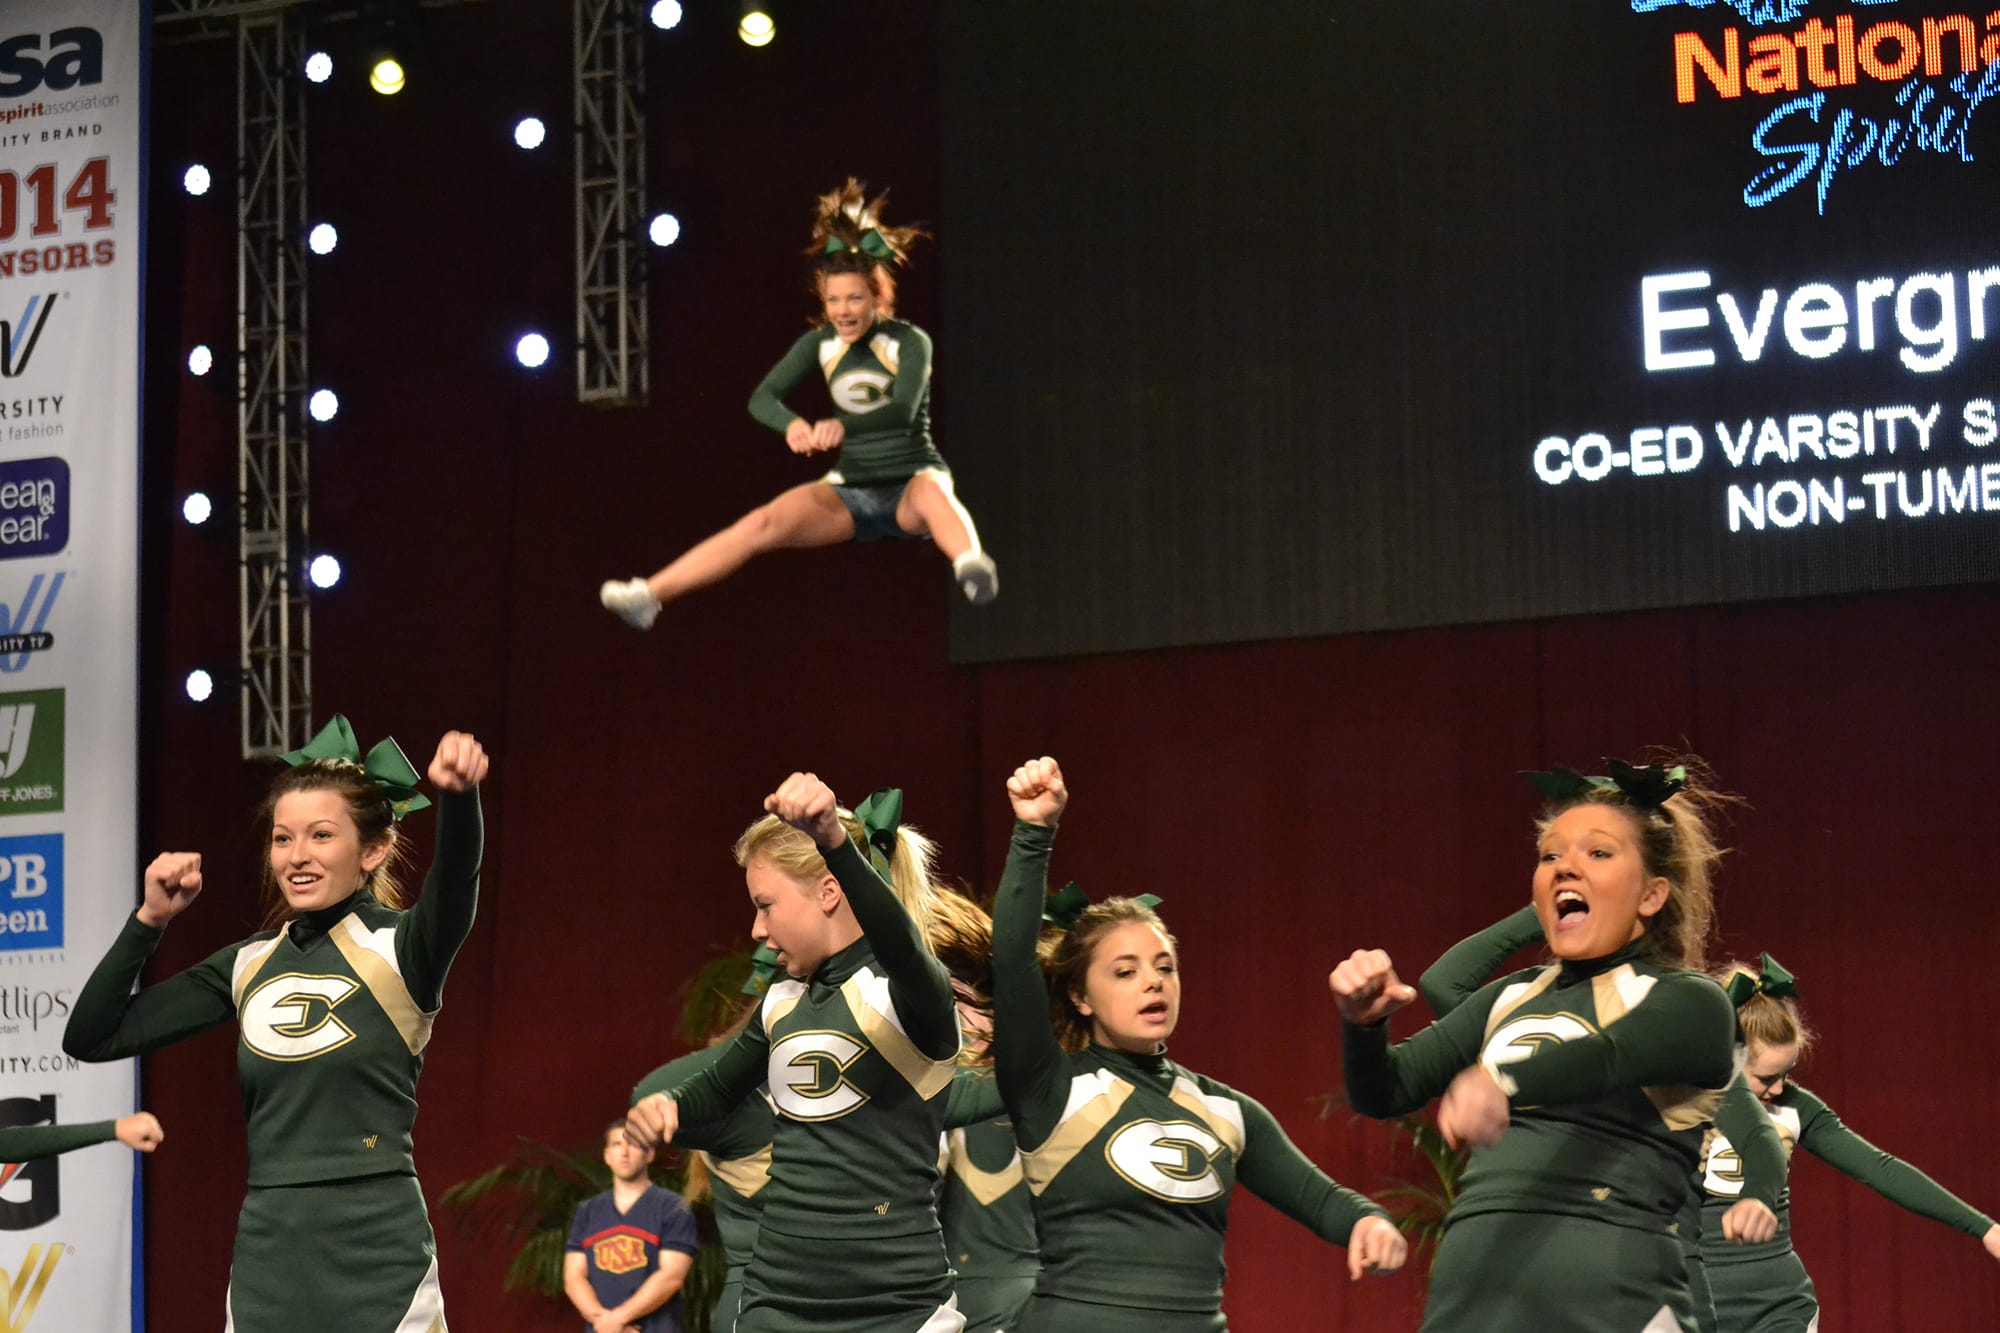 Evergreen High School cheer team 2nd in division nationally The Columbian